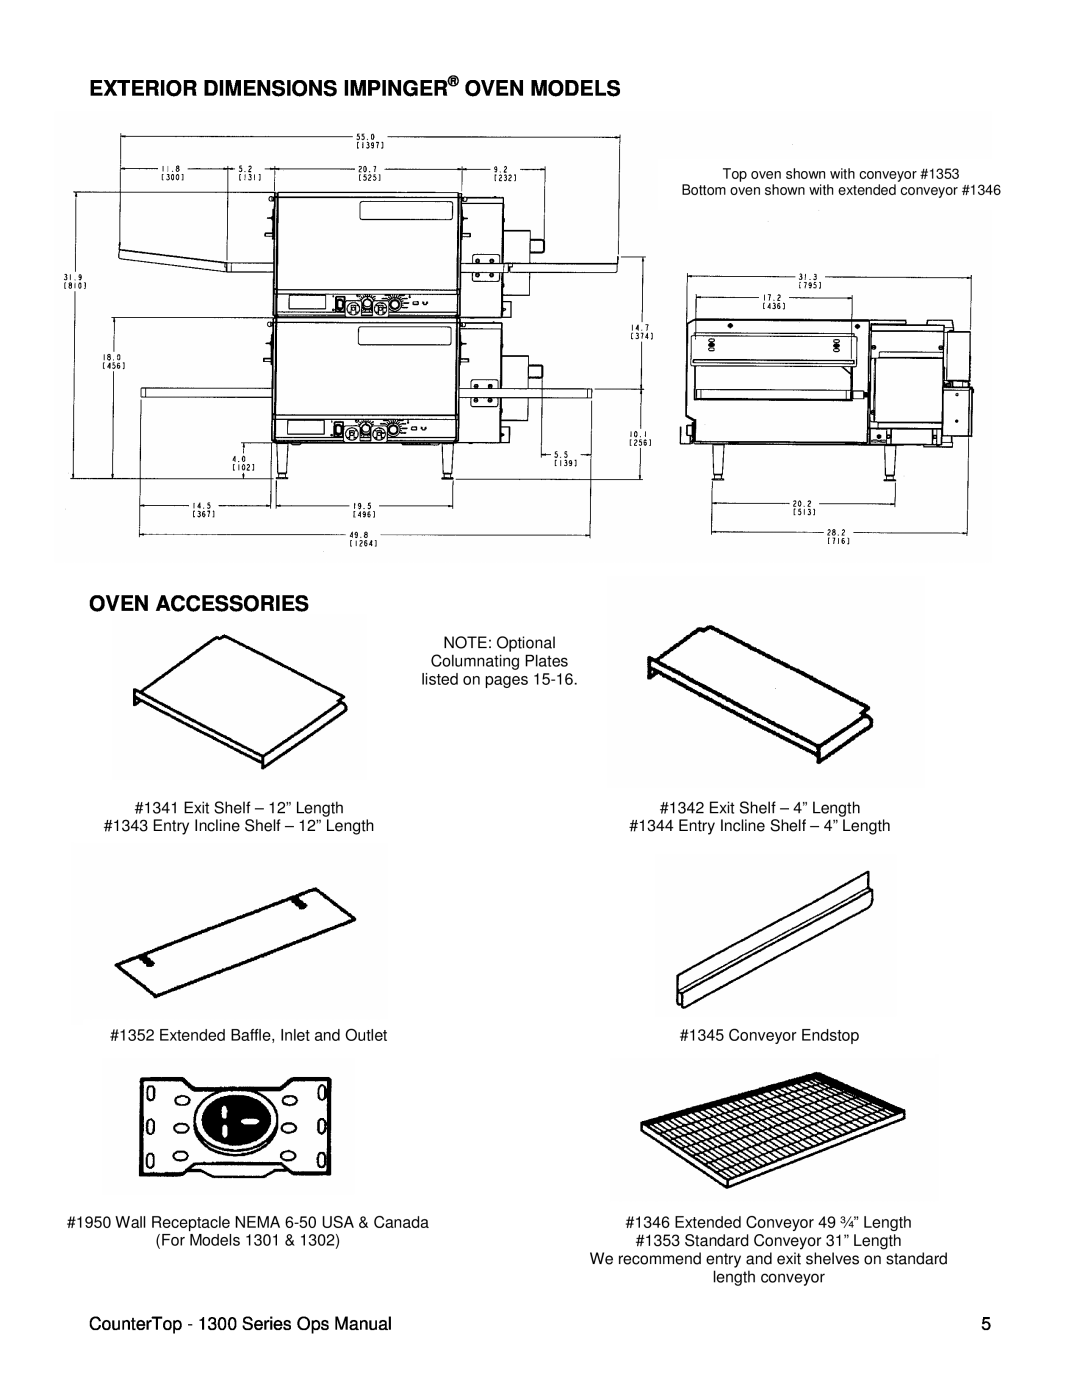 Lincoln Exterior Dimensions Impinger Oven Models, Oven Accessories, CounterTop - 1300 Series Ops Manual 